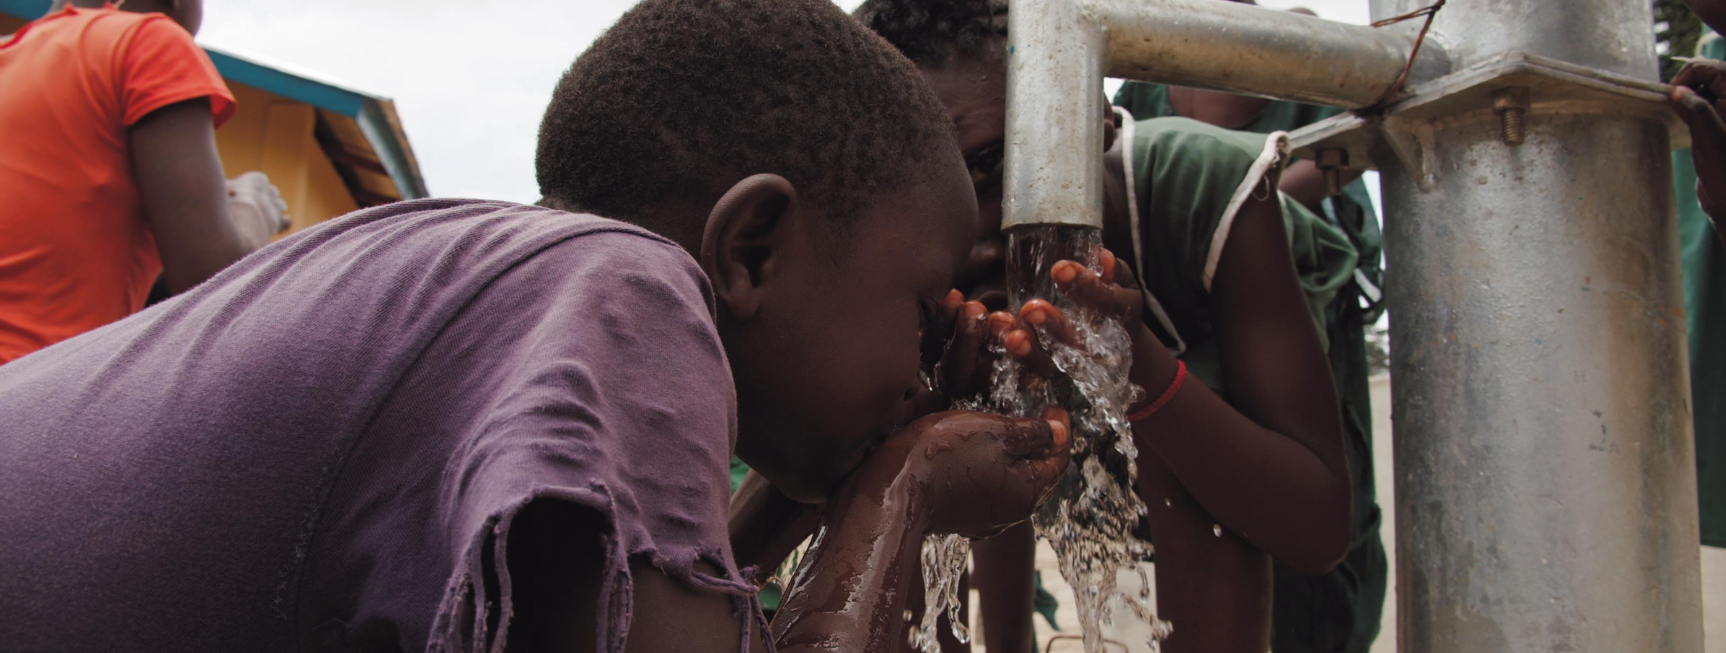 An image of an African child drinking clean water from a water pump. The child is cupping their hands together and bringing the water to her mouth.